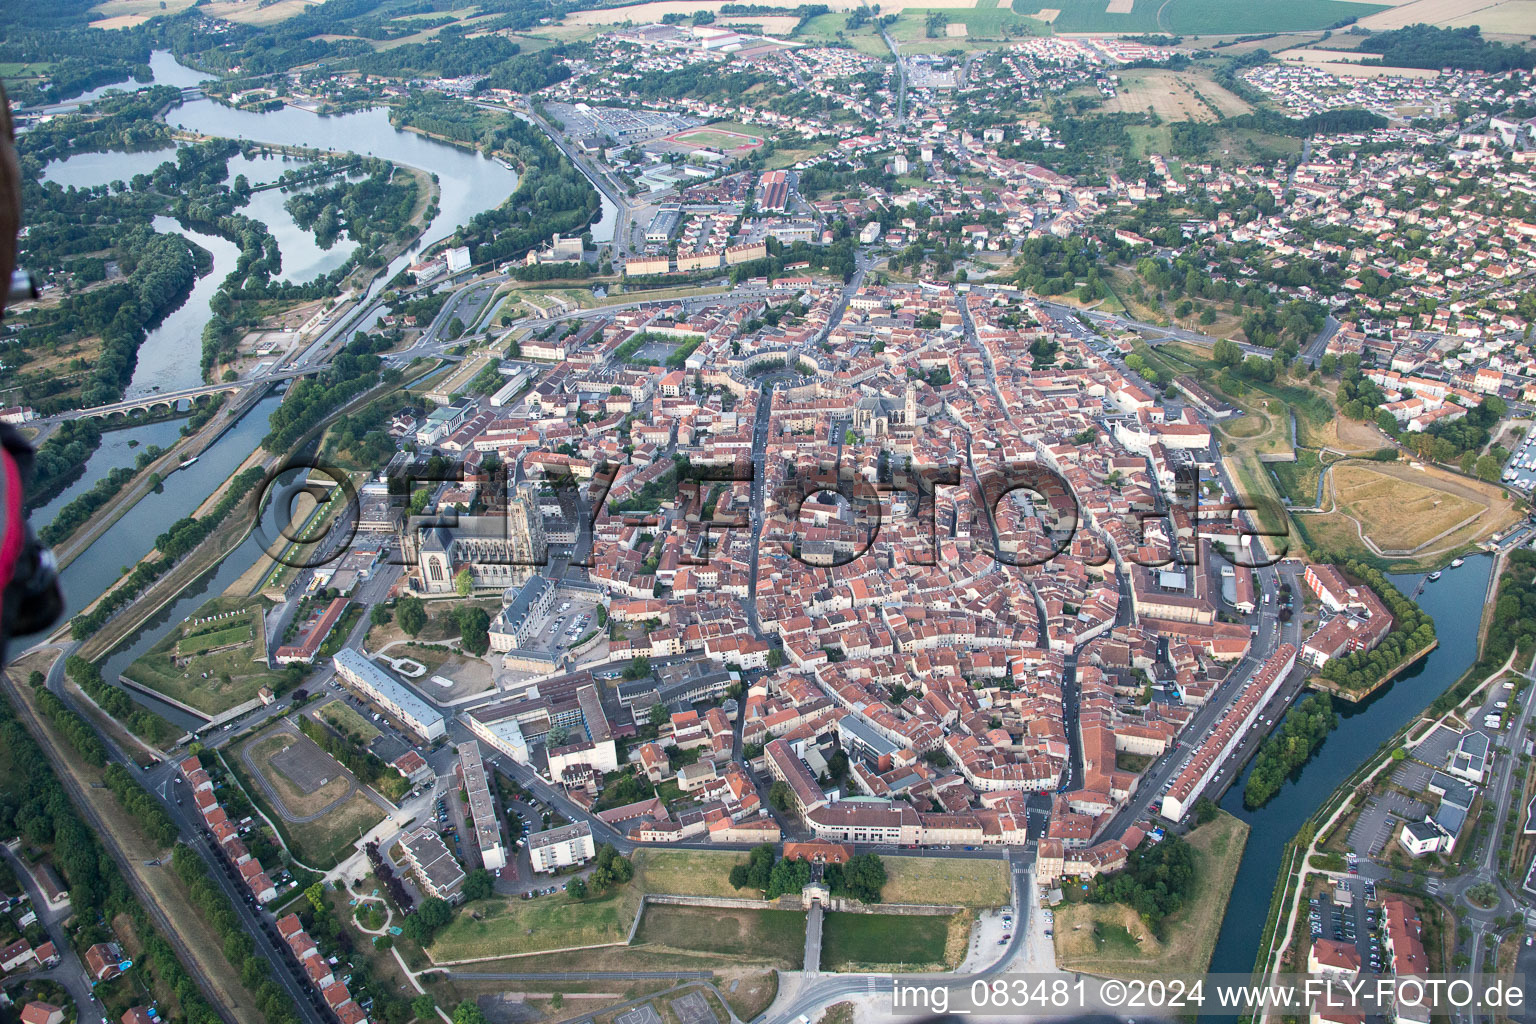 Bird's eye view of Toul in the state Meurthe et Moselle, France